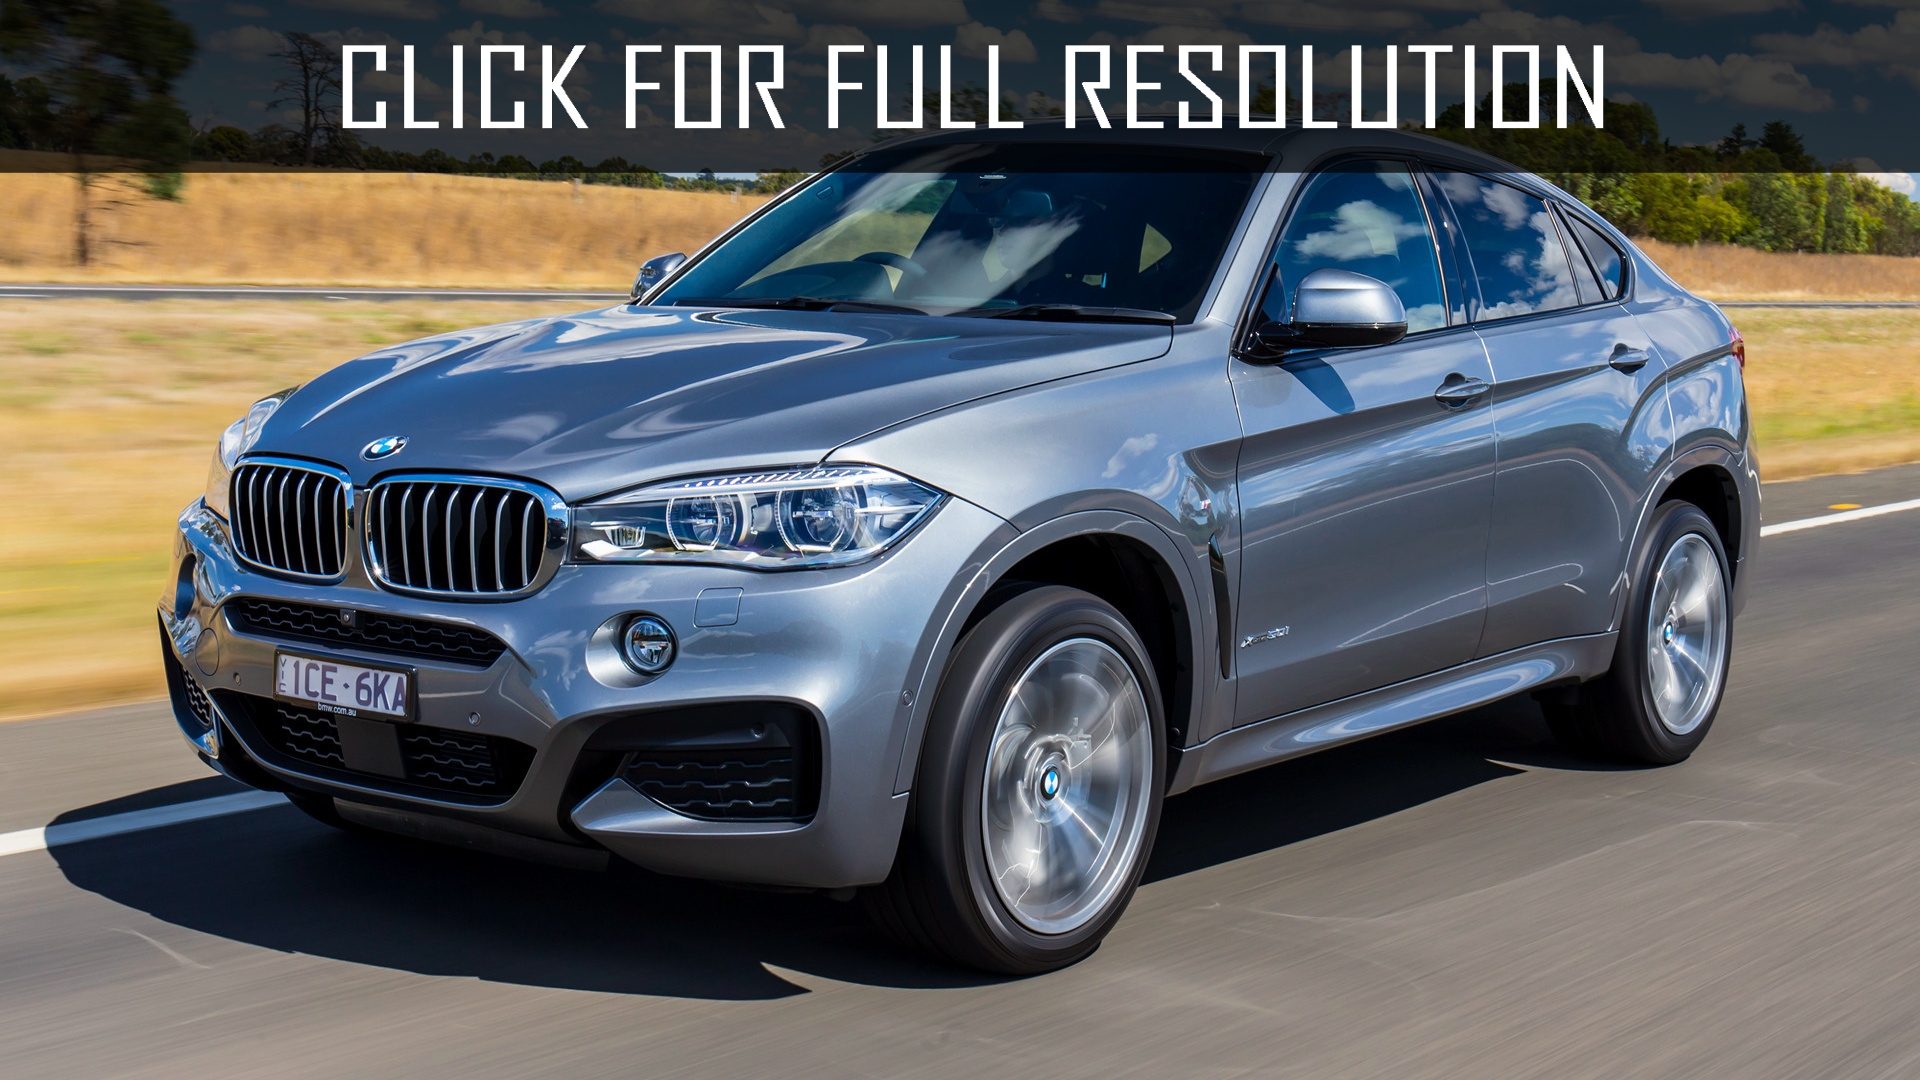 The Beast Of Luxury: The 2016 BMW X6 M